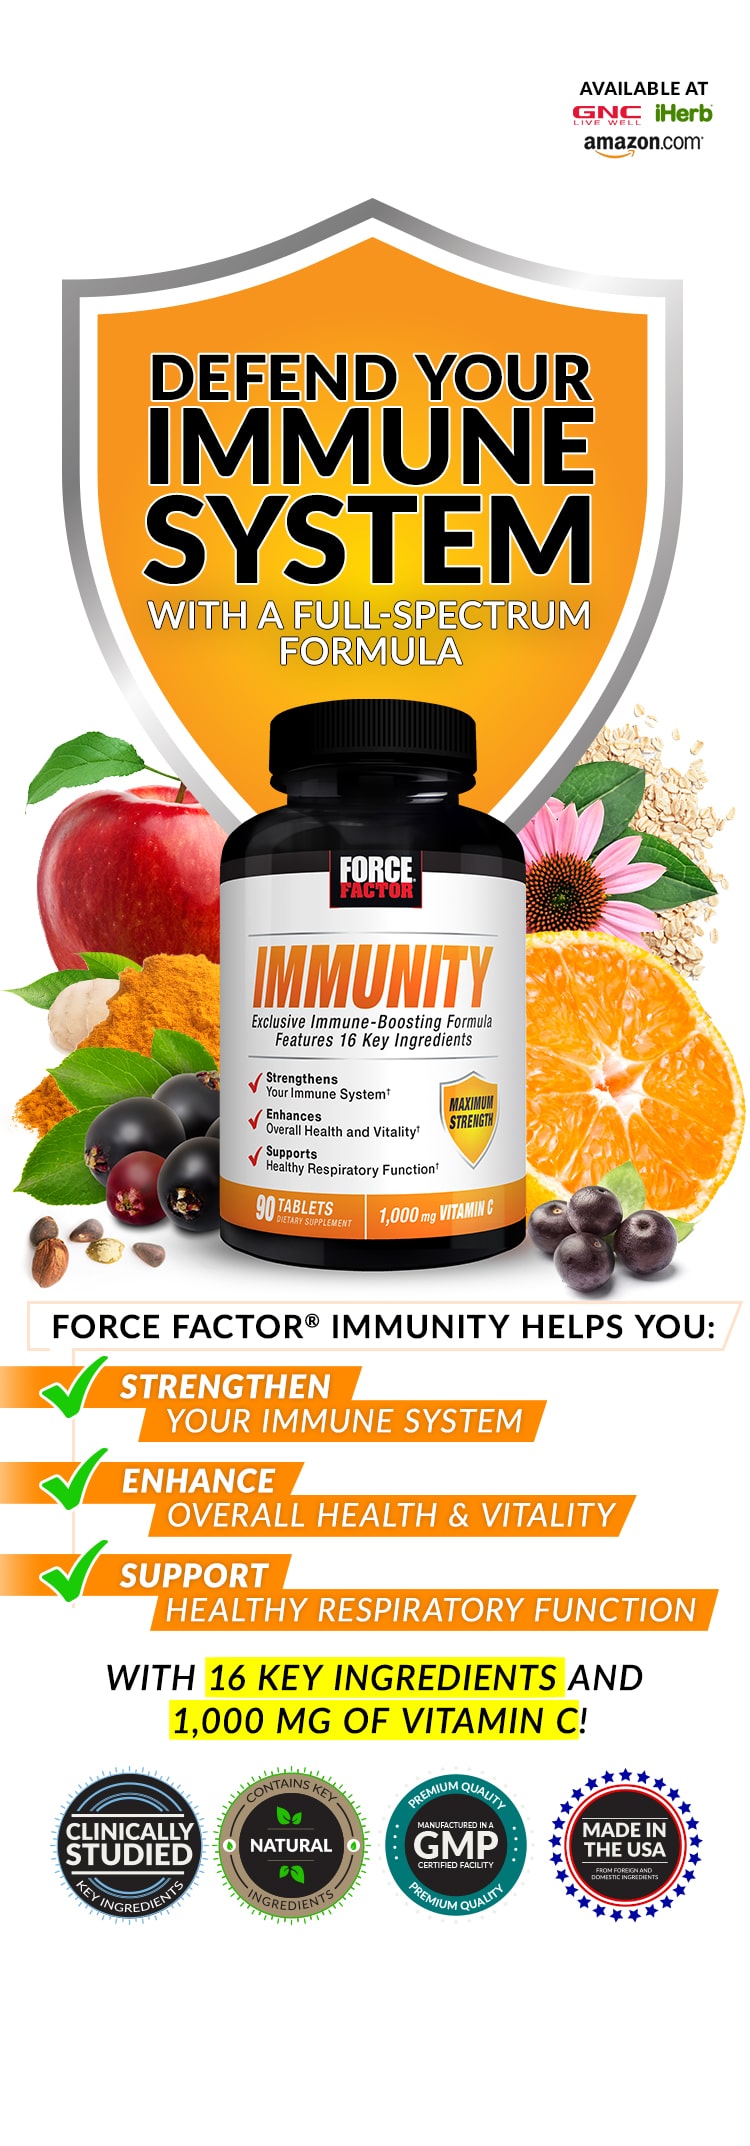 DEFEND YOUR IMMUNE SYSTEM WITH A FULL-SPECTRUM FORMULA. FORCE FACTOR® IMMUNITY HELPS YOU: STRENGHTEN YOUR IMMUNE SYSTEM, ENHANCE OVERALL HEALTH AND VITALITY, SUPPORT HEALTHY RESPIRATORY FUNCTION. WITH 16 KEY INGREDIENTS AND 1,000 MG OF VITAMIN C!